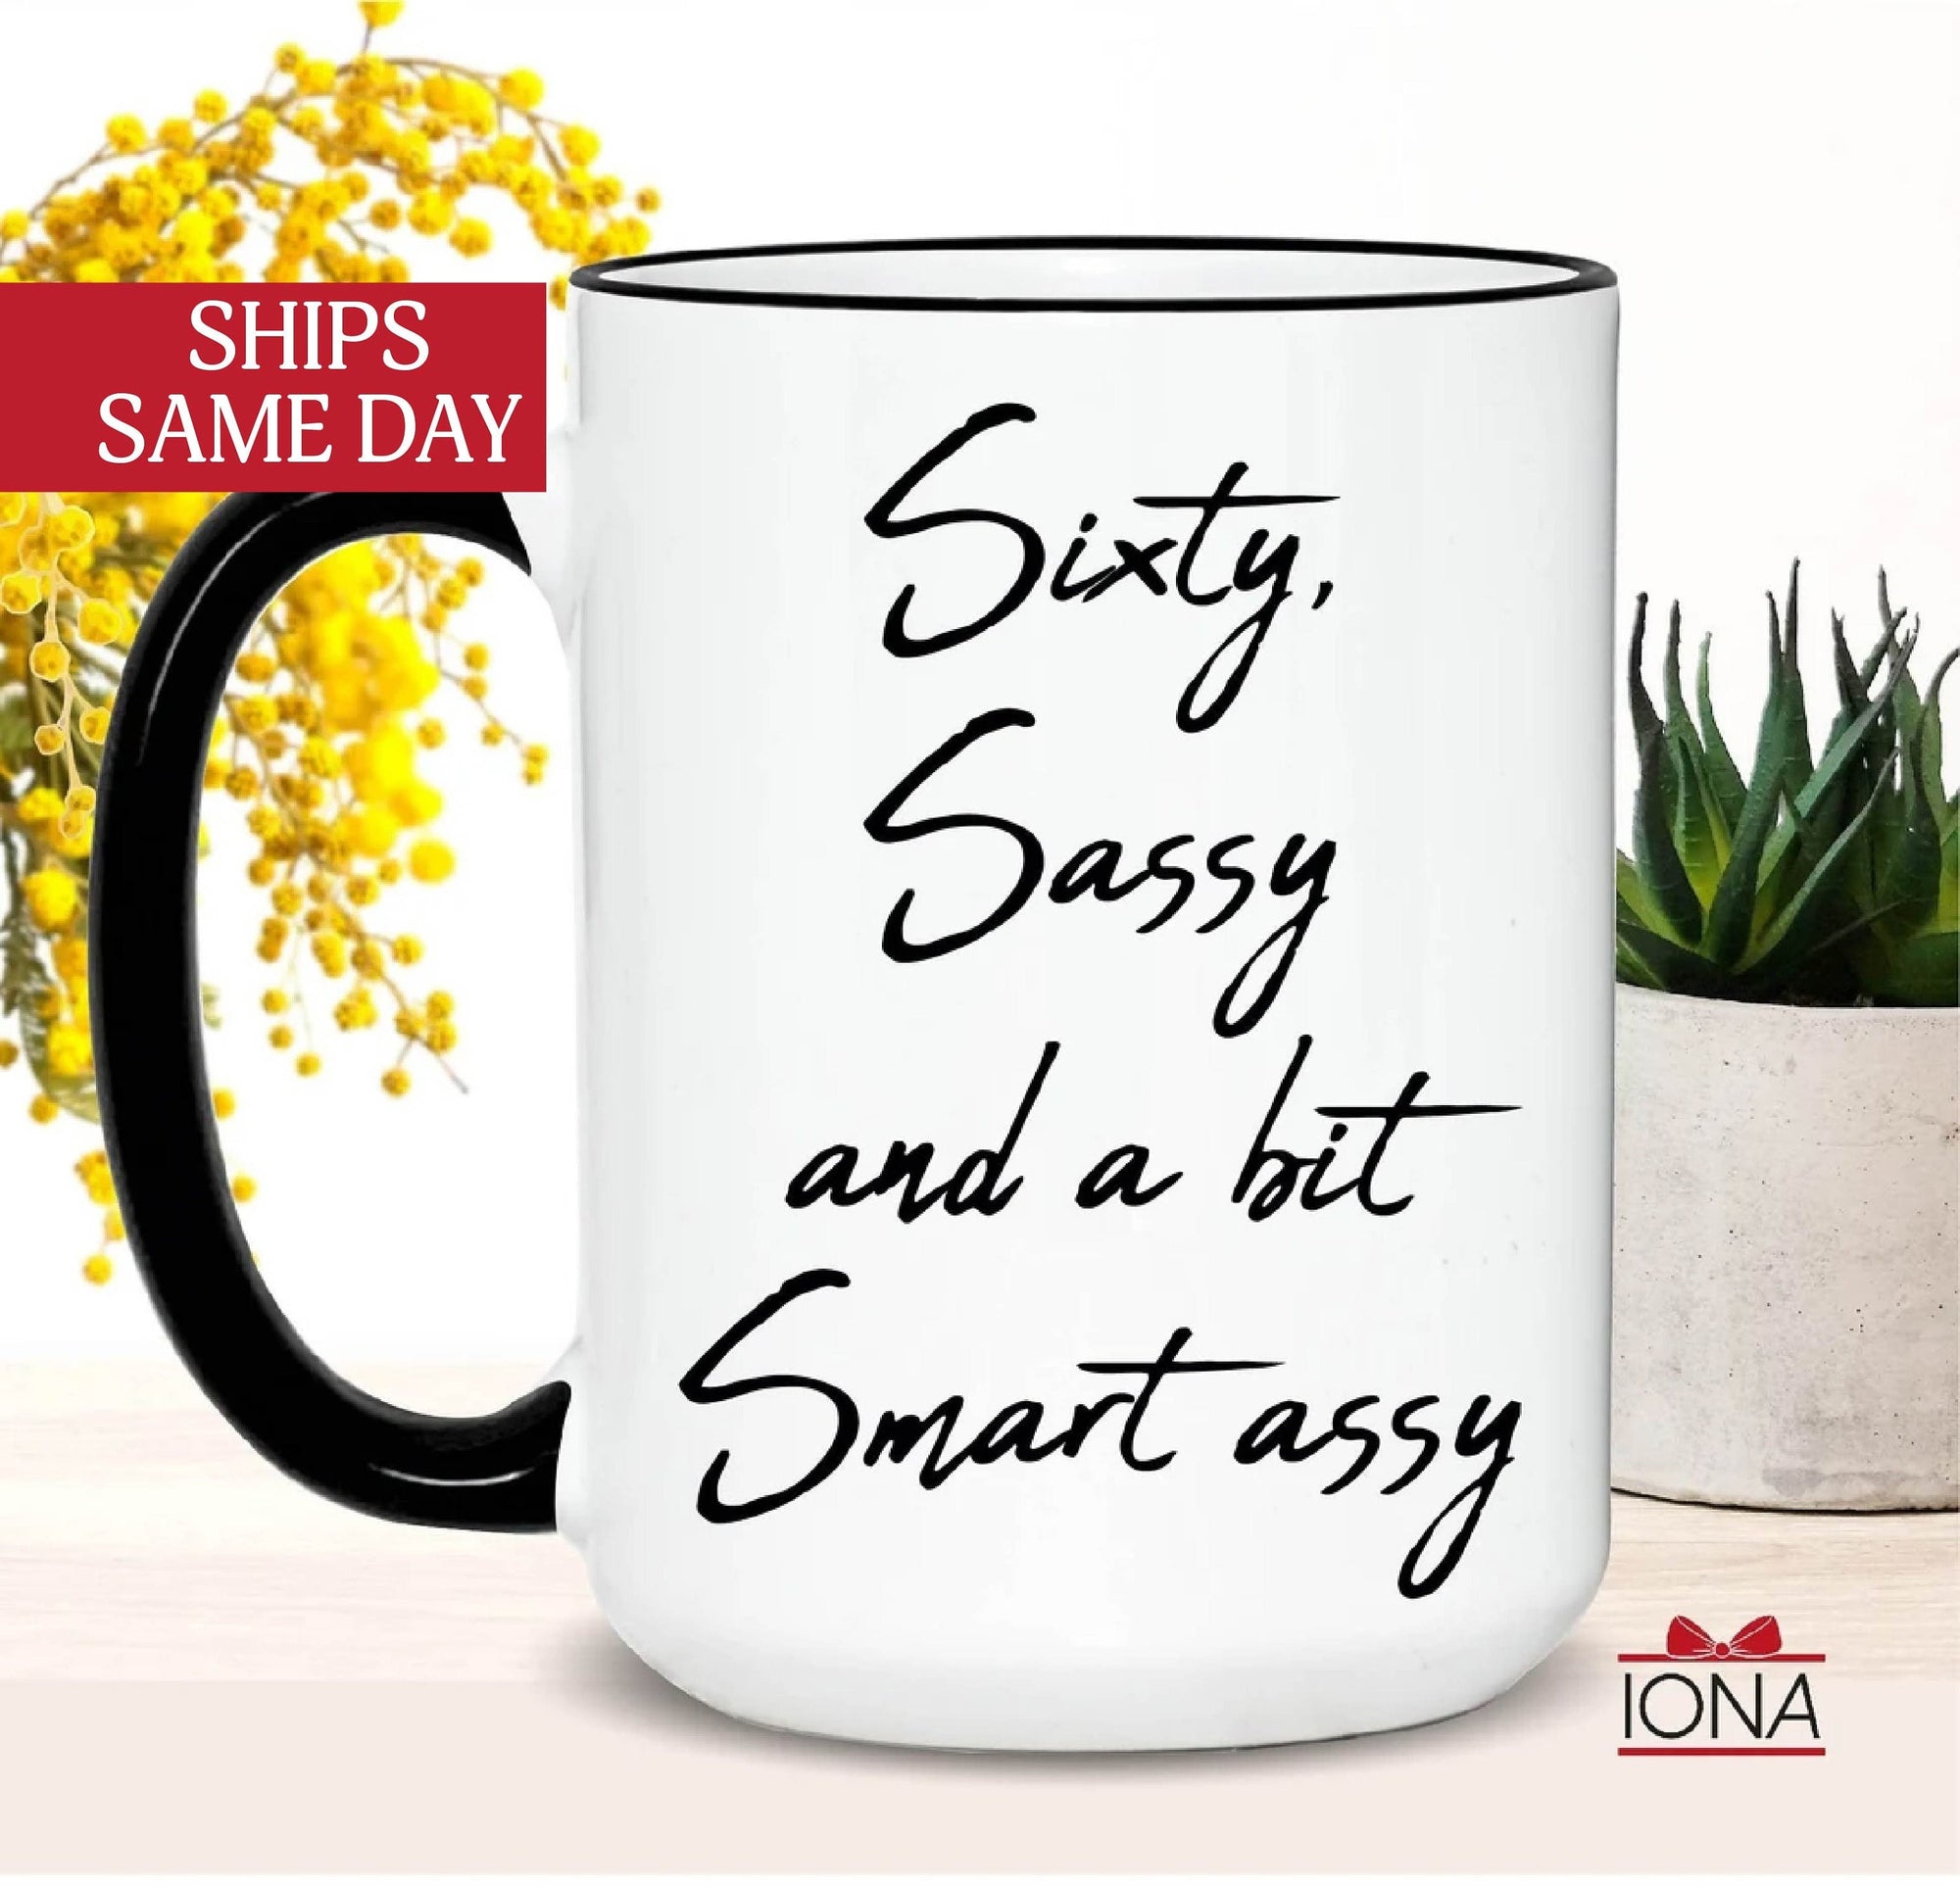 60th Birthday Gift, 60th Birthday Coffee Mug, Born in 1964, Sixty Sassy and a bit Smart assy, Best Friends 60th Gifts, gifts for women ideas